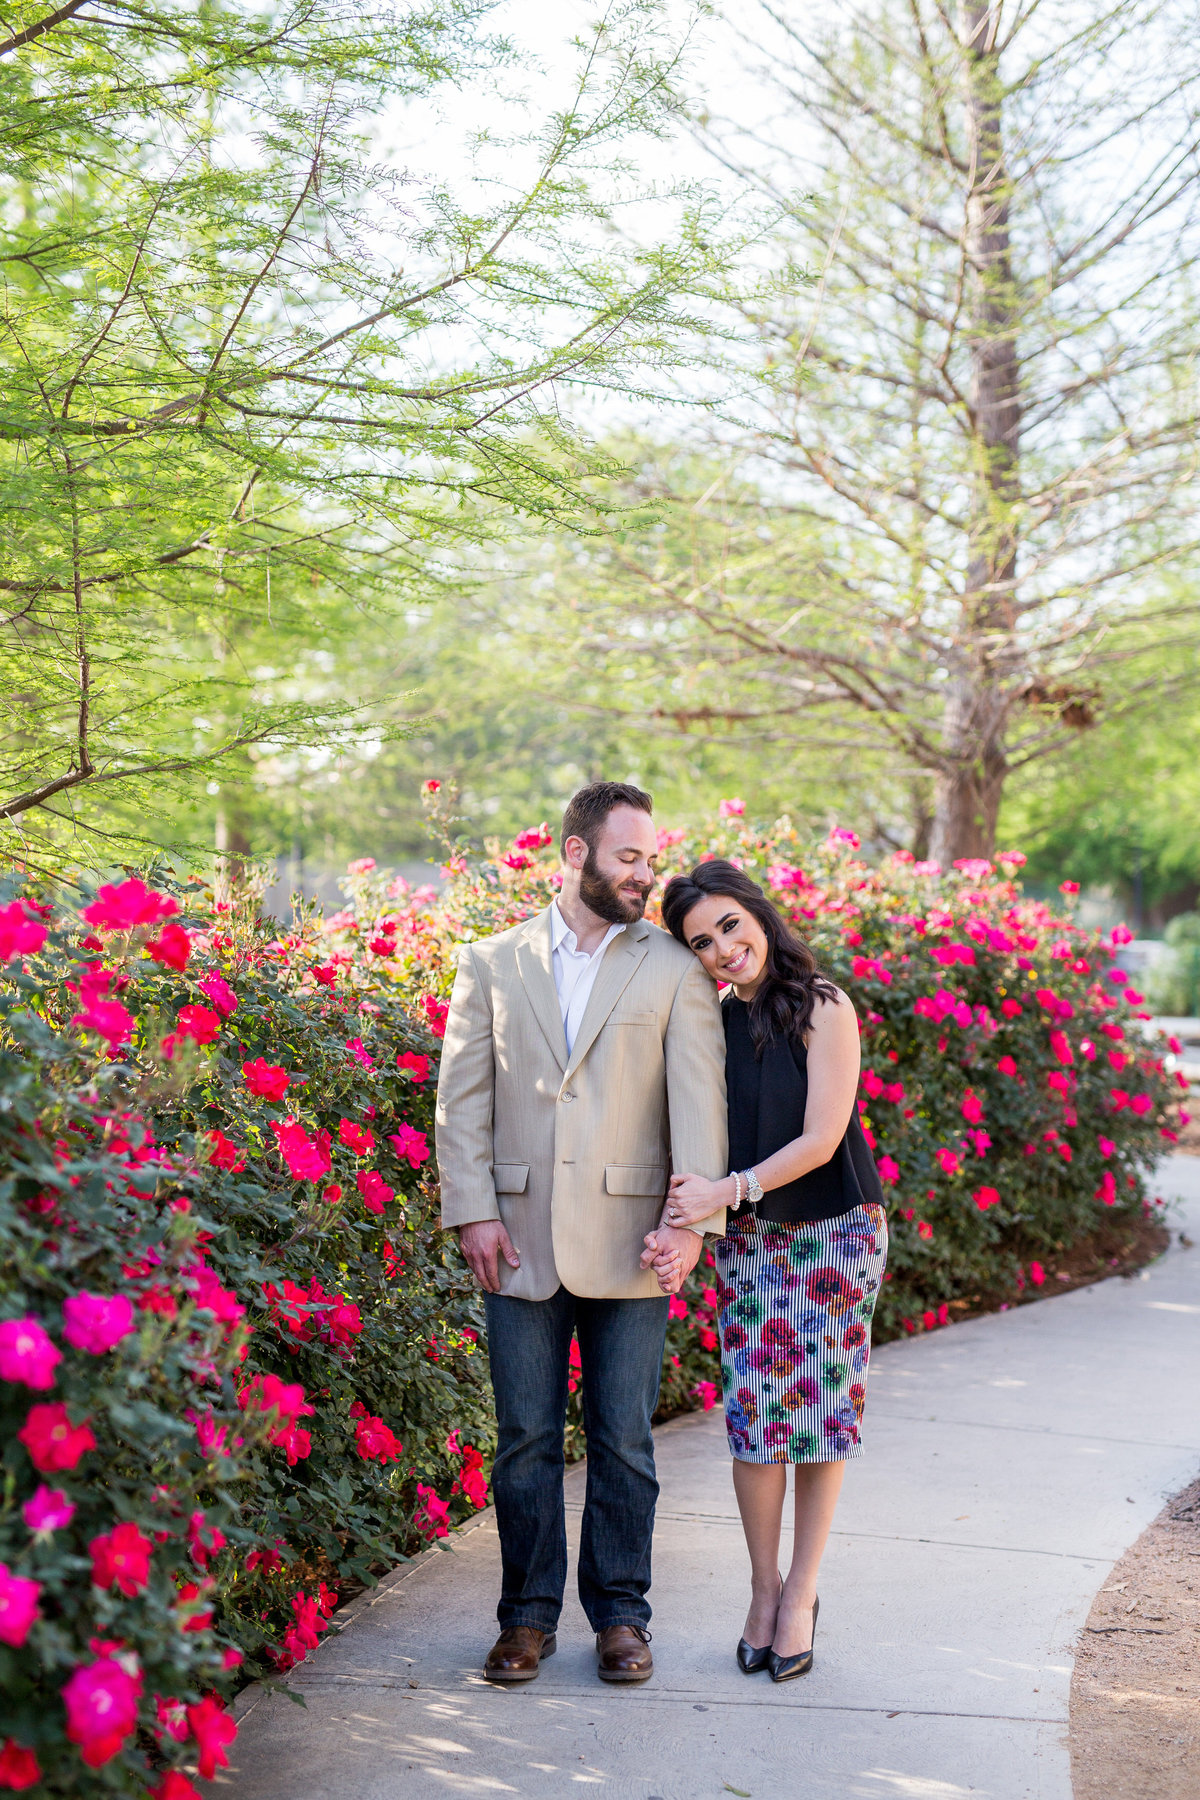 Engagement photography session of woman putting her head on the shoulder of her fiancé standing next to roses and the San Antonio Riverwalk.